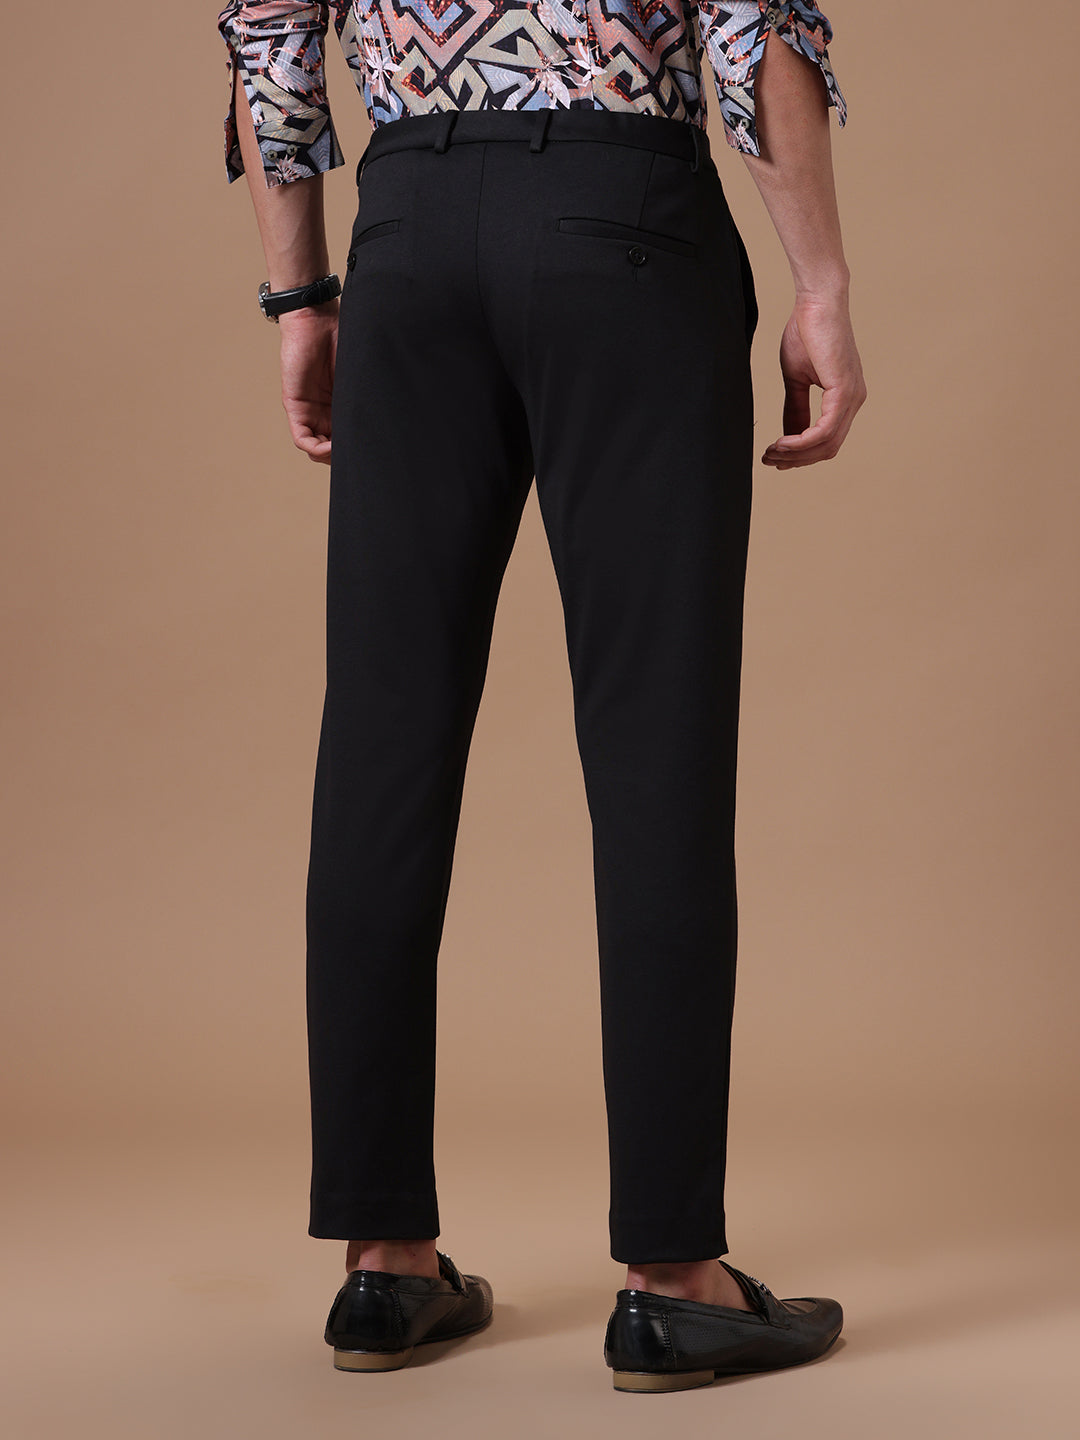 Knitted Slim Fit Black Formal Stretch Trouser (TAHLIA)